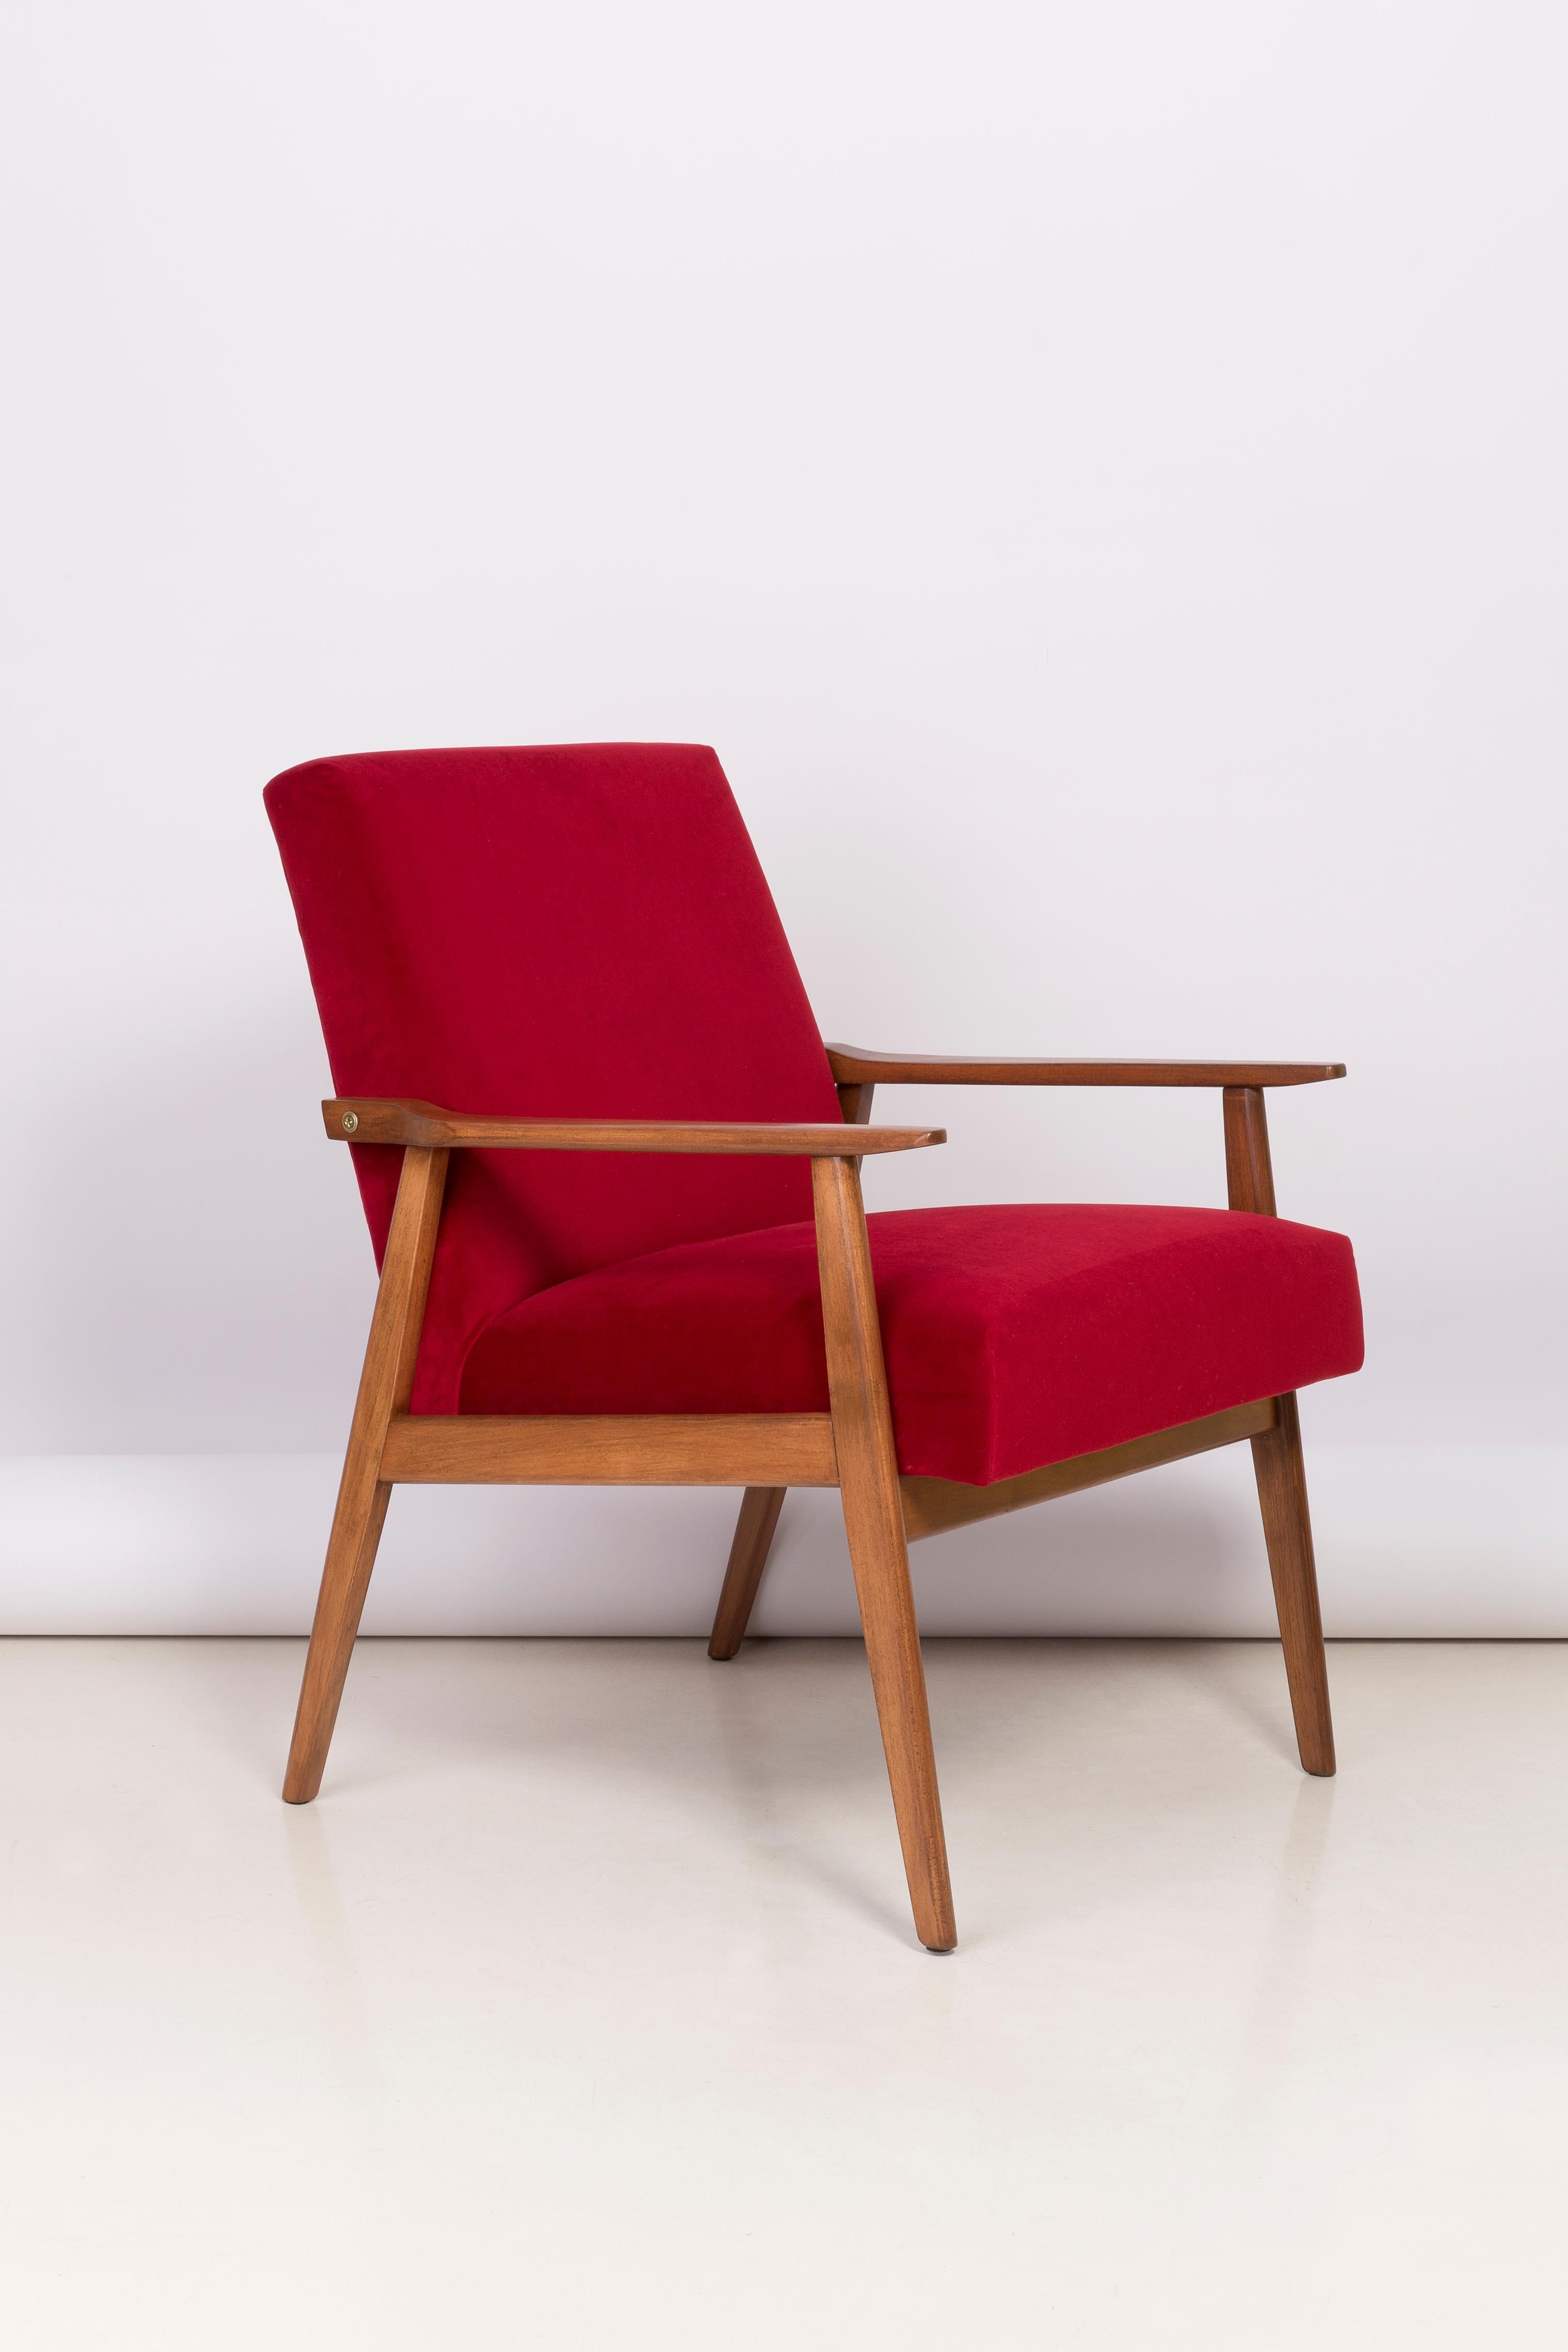 Set of Four Midcentury Red Velvet Dante Armchairs, Europe, 1960s For Sale 2